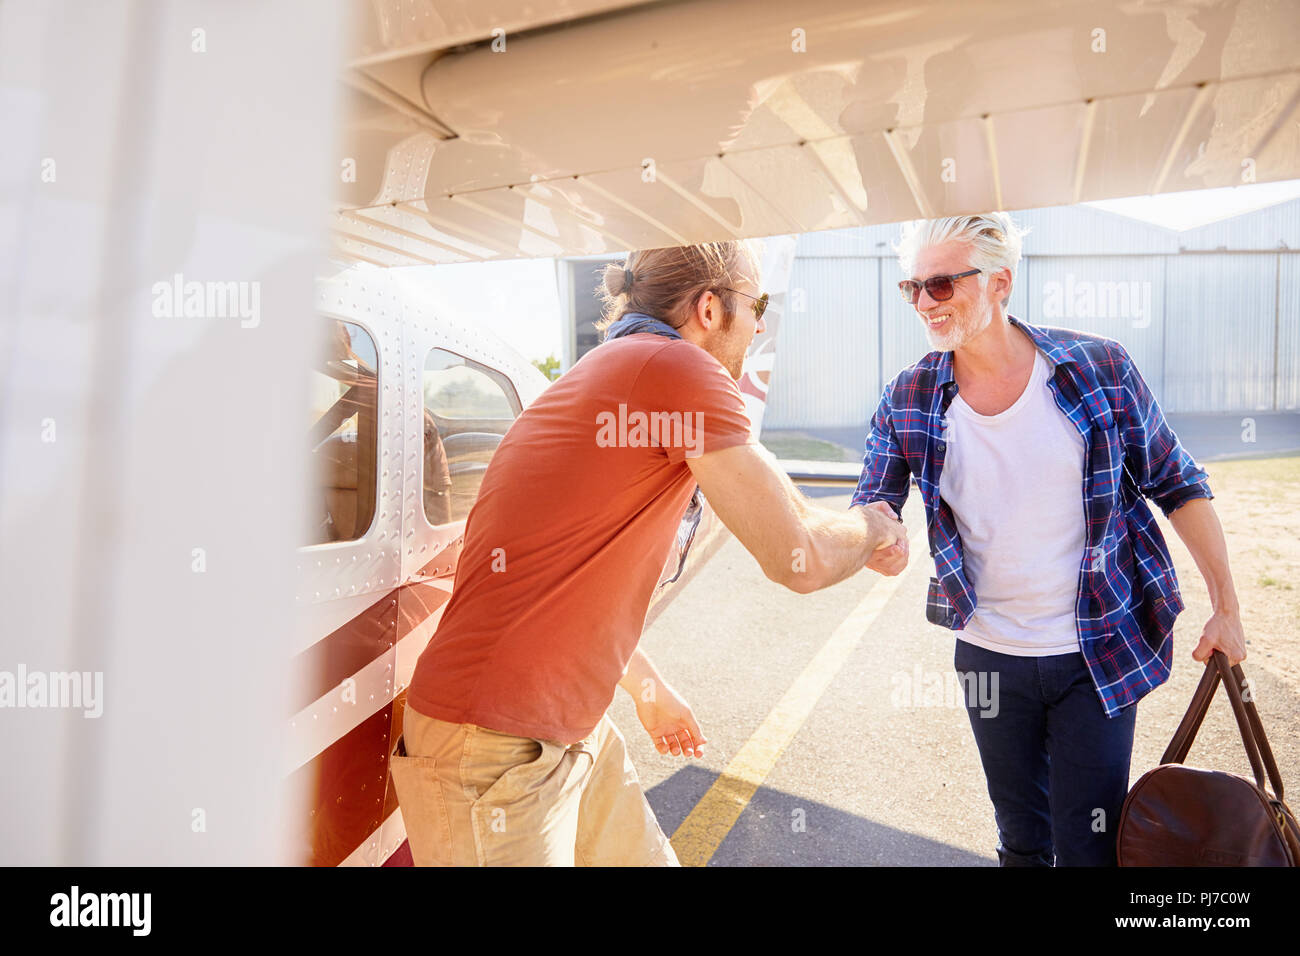 Pilot shaking hands with man boarding small airplane Stock Photo